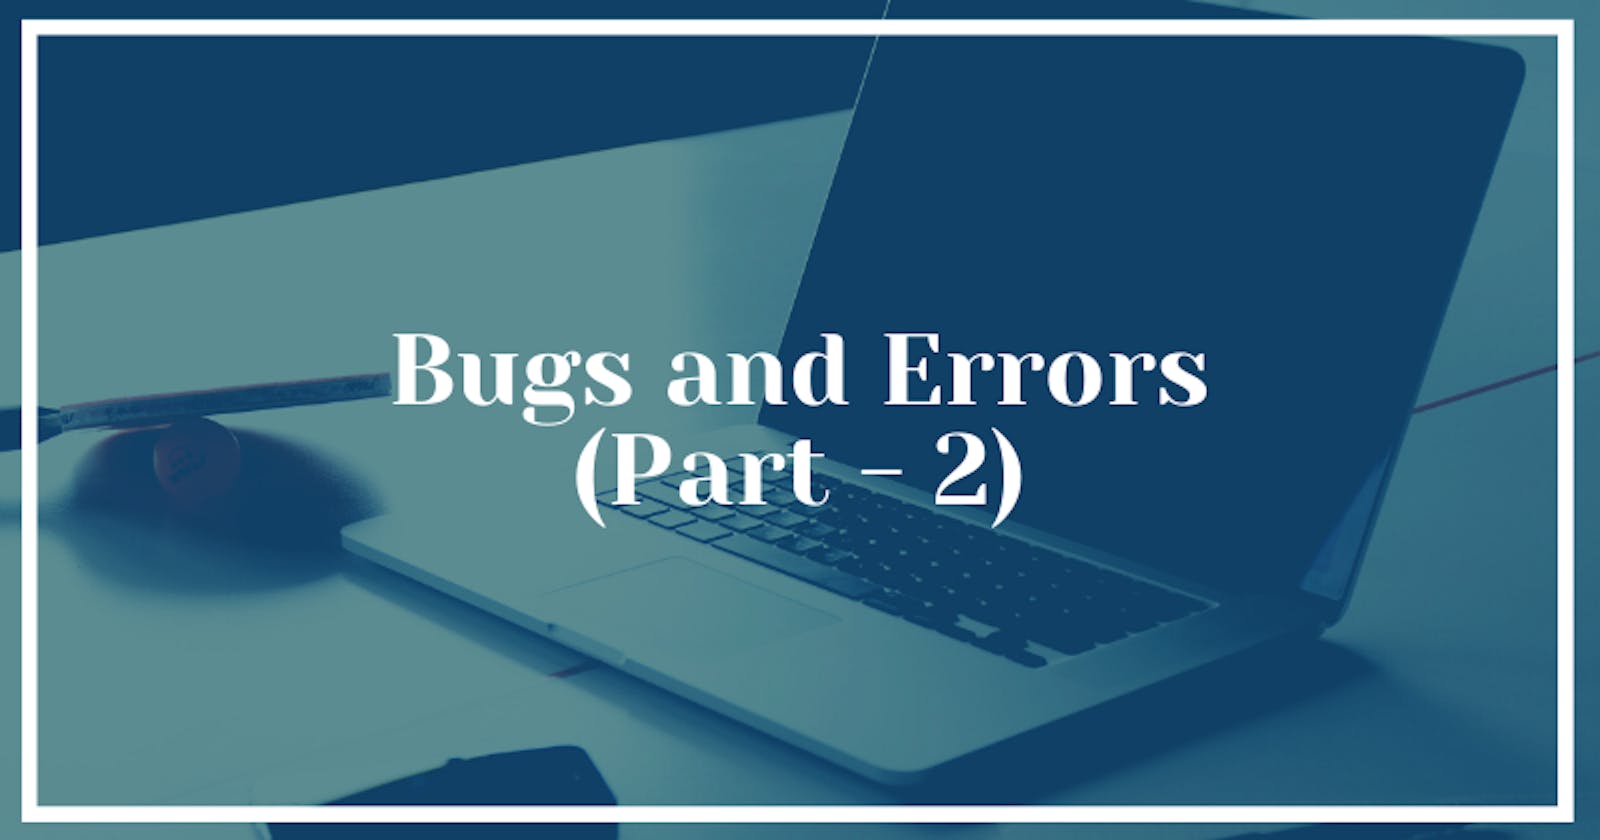 Bugs and Errors (Part - 2)